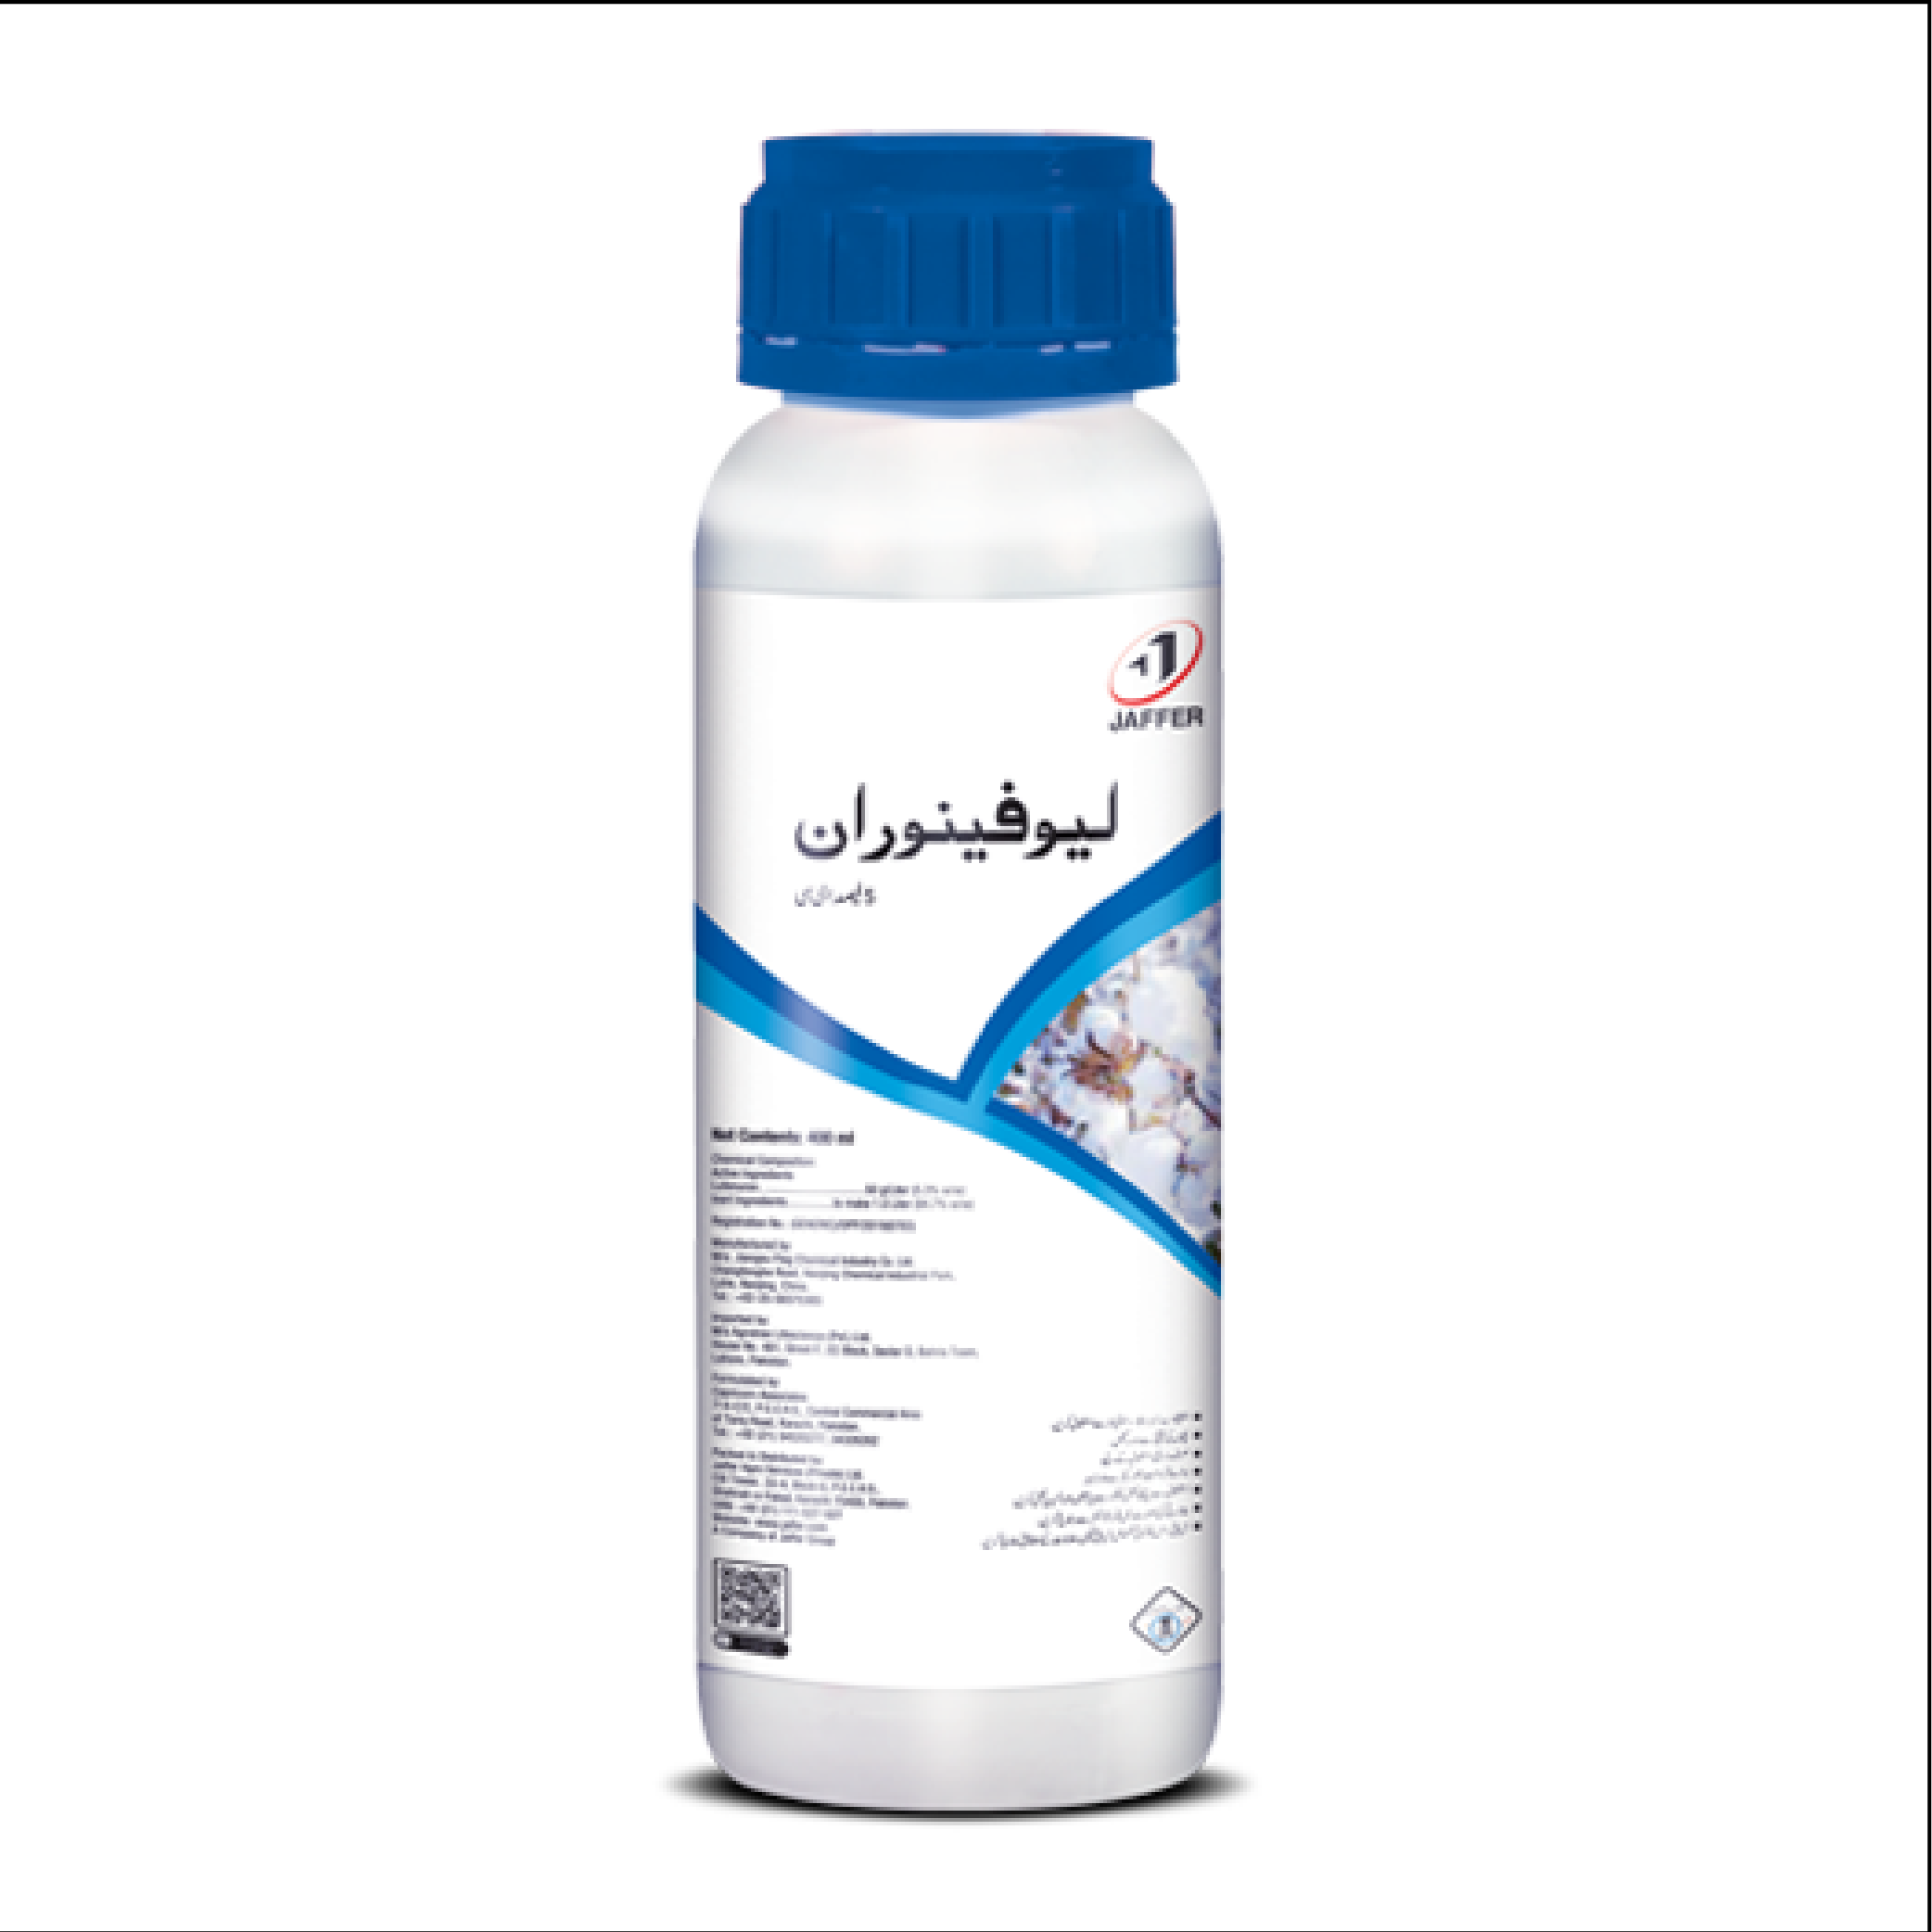 2nd Lufenuron 5ec 400ml Insecticide Jaffer Agro Services